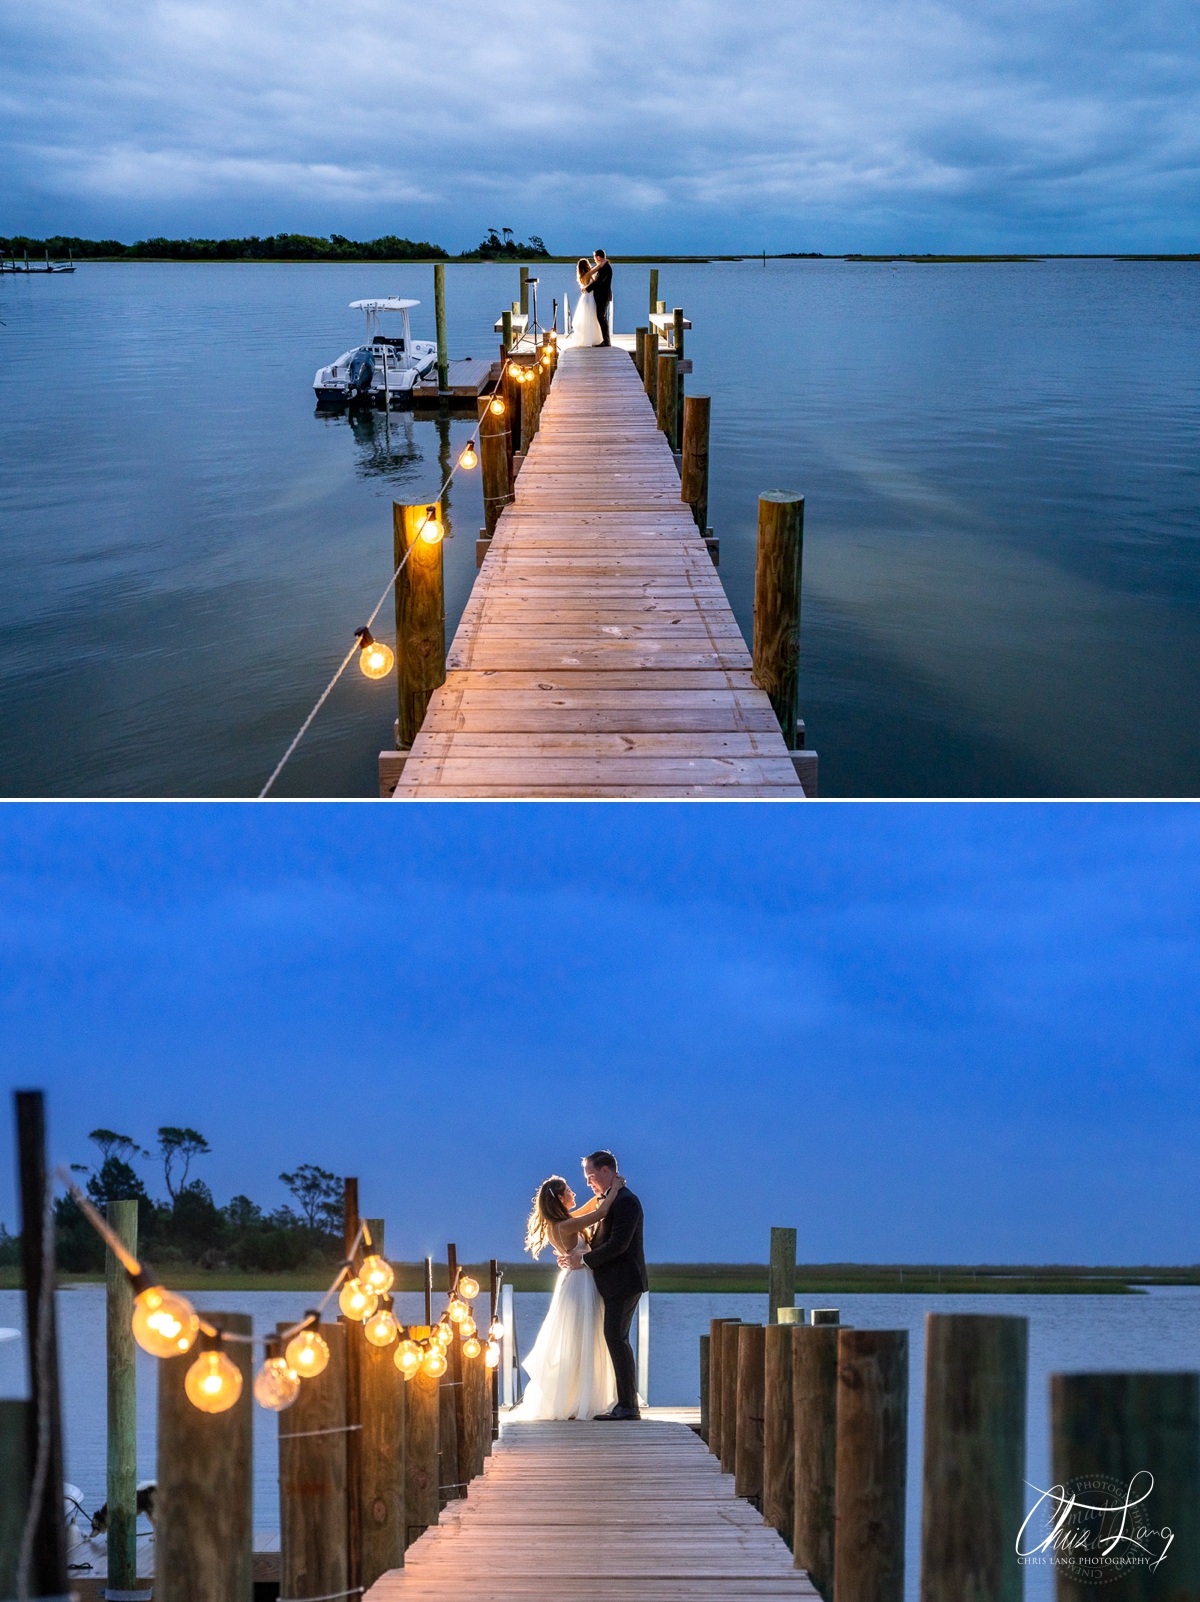 twilight wedding photos  - sunset phots of bride and groom on the intercostal waterway - Wilmington NC - coastal weddings - bride - groom - wedding dress - chris lang photography